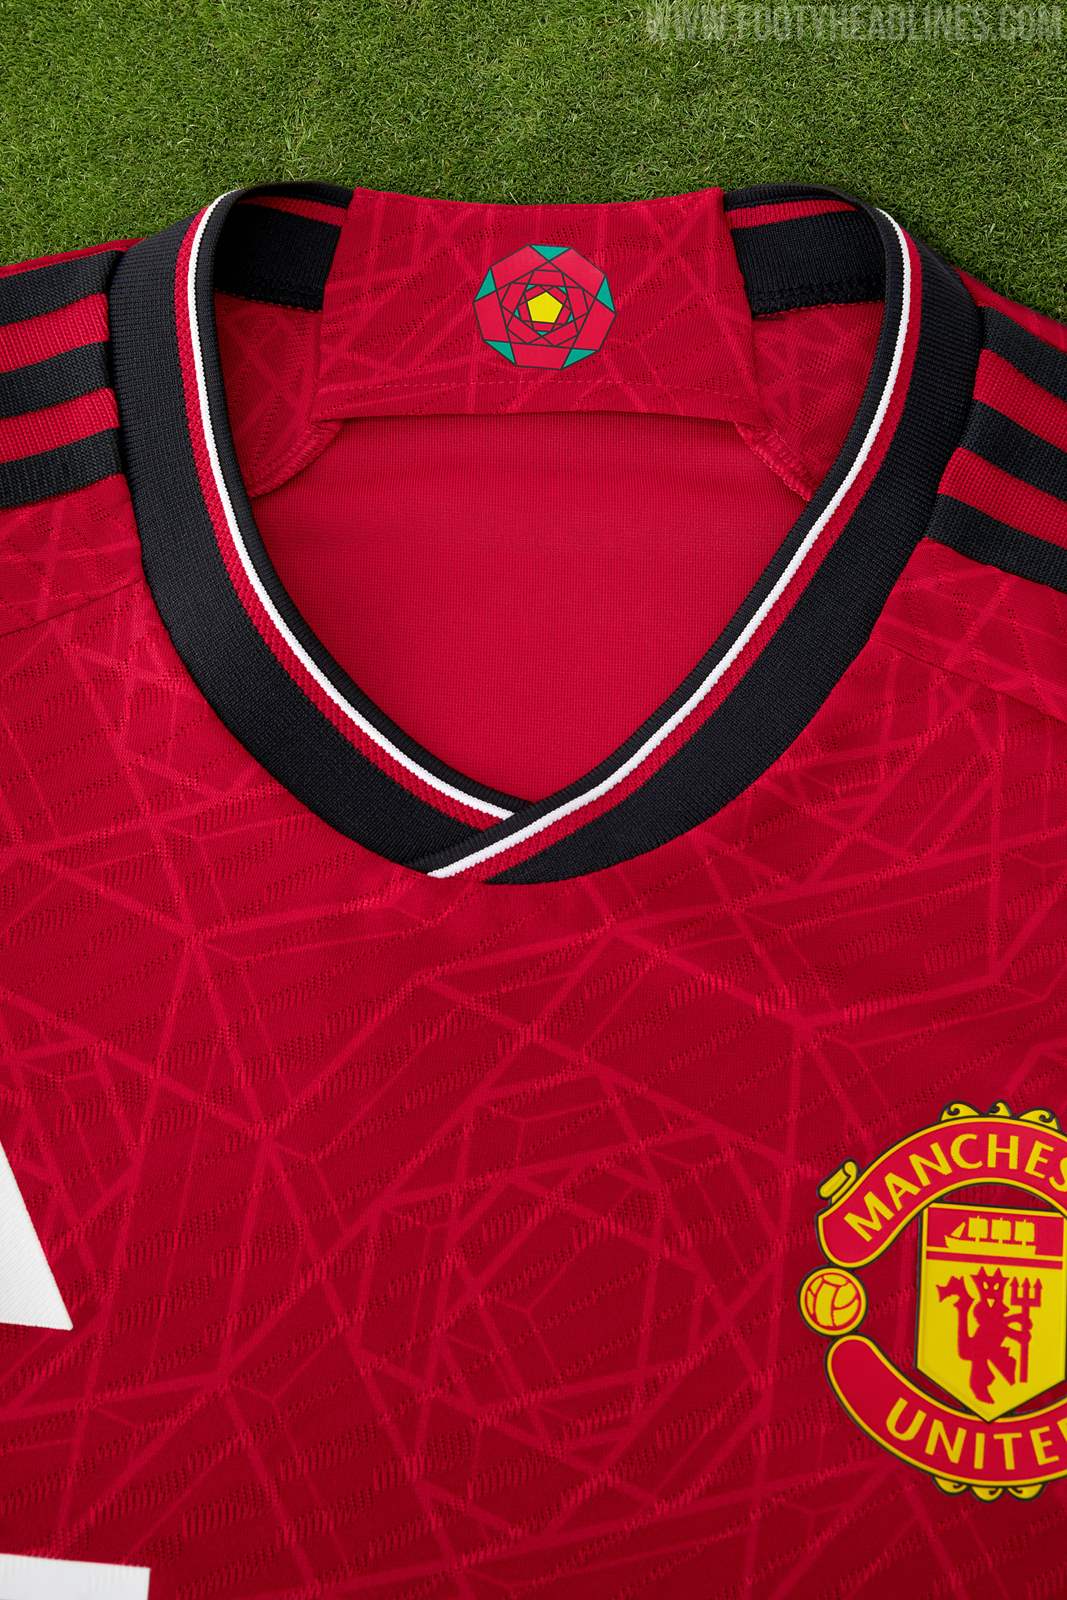 Manchester United 23-24 Home Kit Released - Footy Headlines